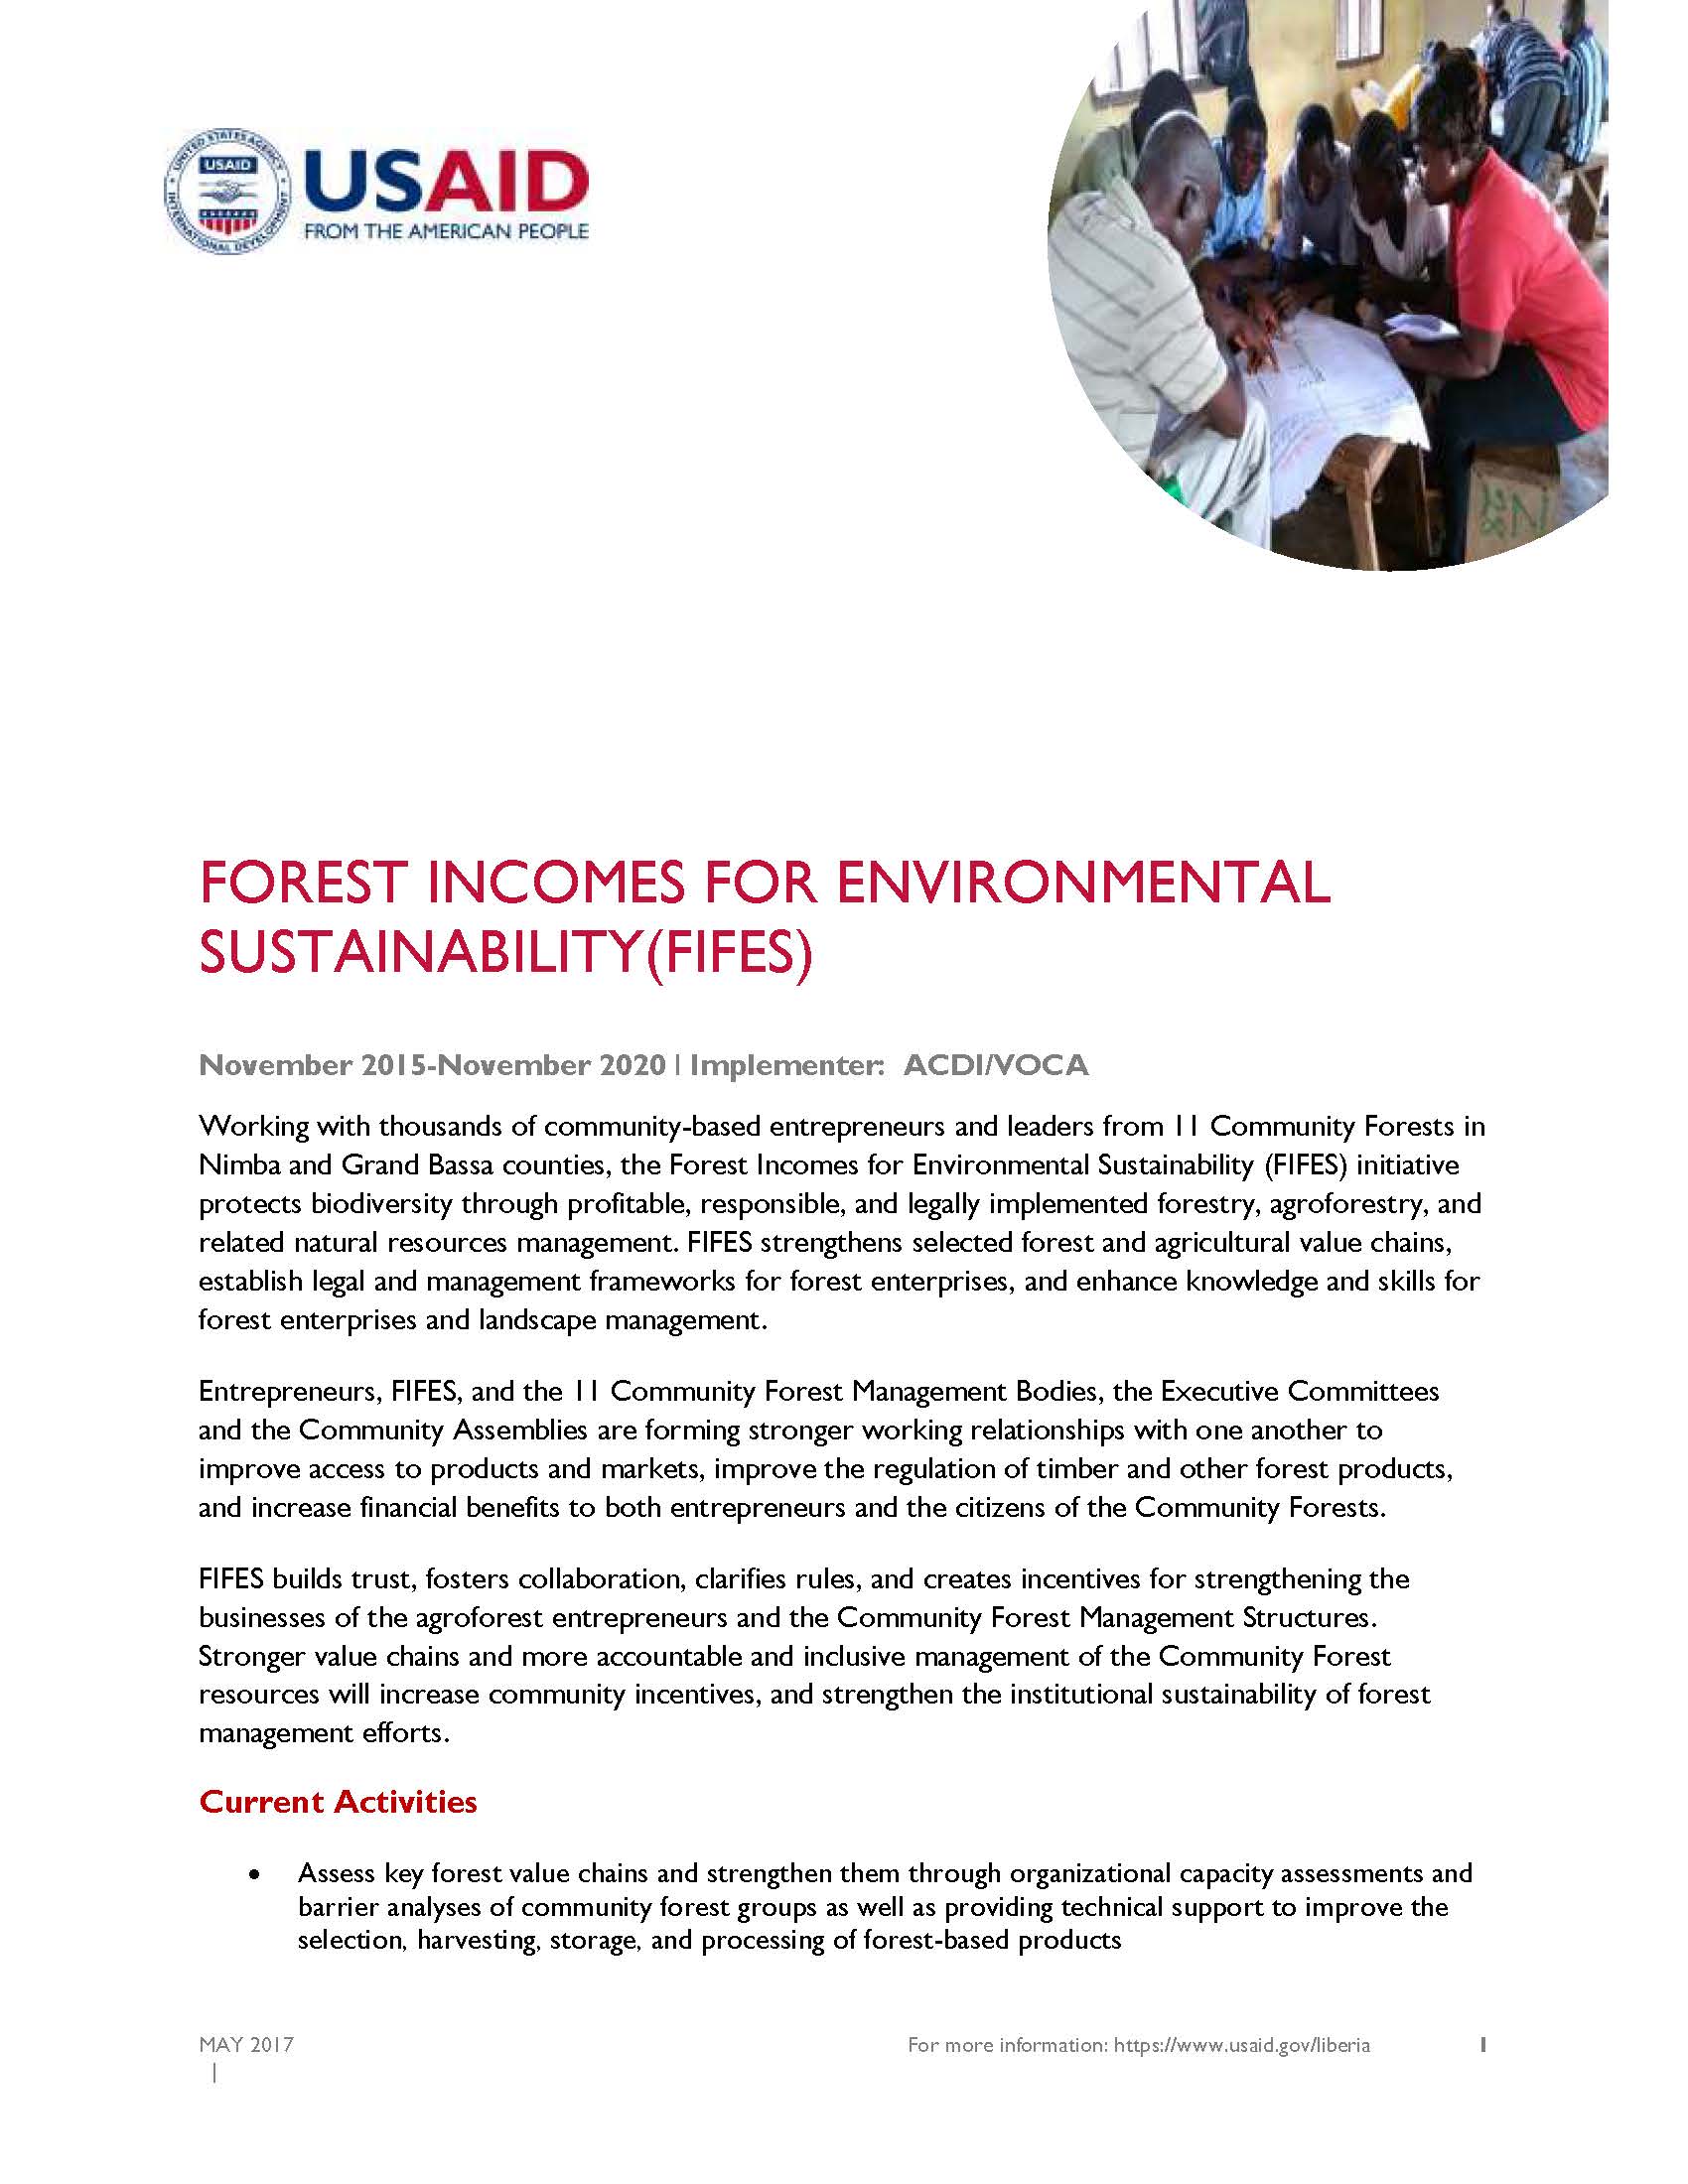 Forest Incomes for Environmental Sustainability Fact Sheet 